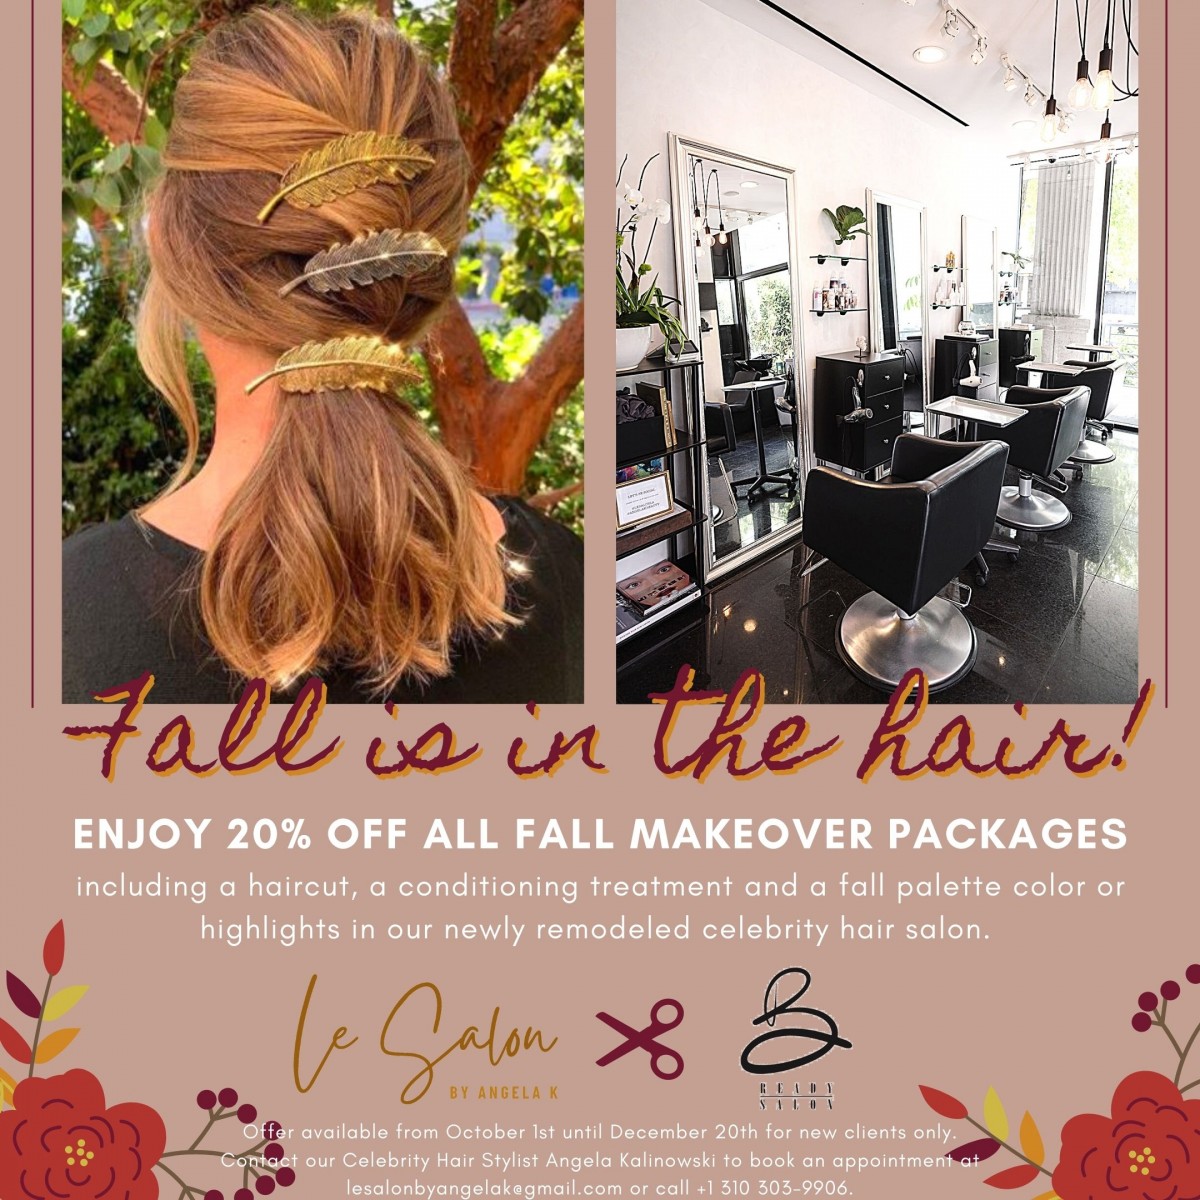 Photo of the hotel Sofitel Los Angeles at Beverly Hills: Fall offer le salon final